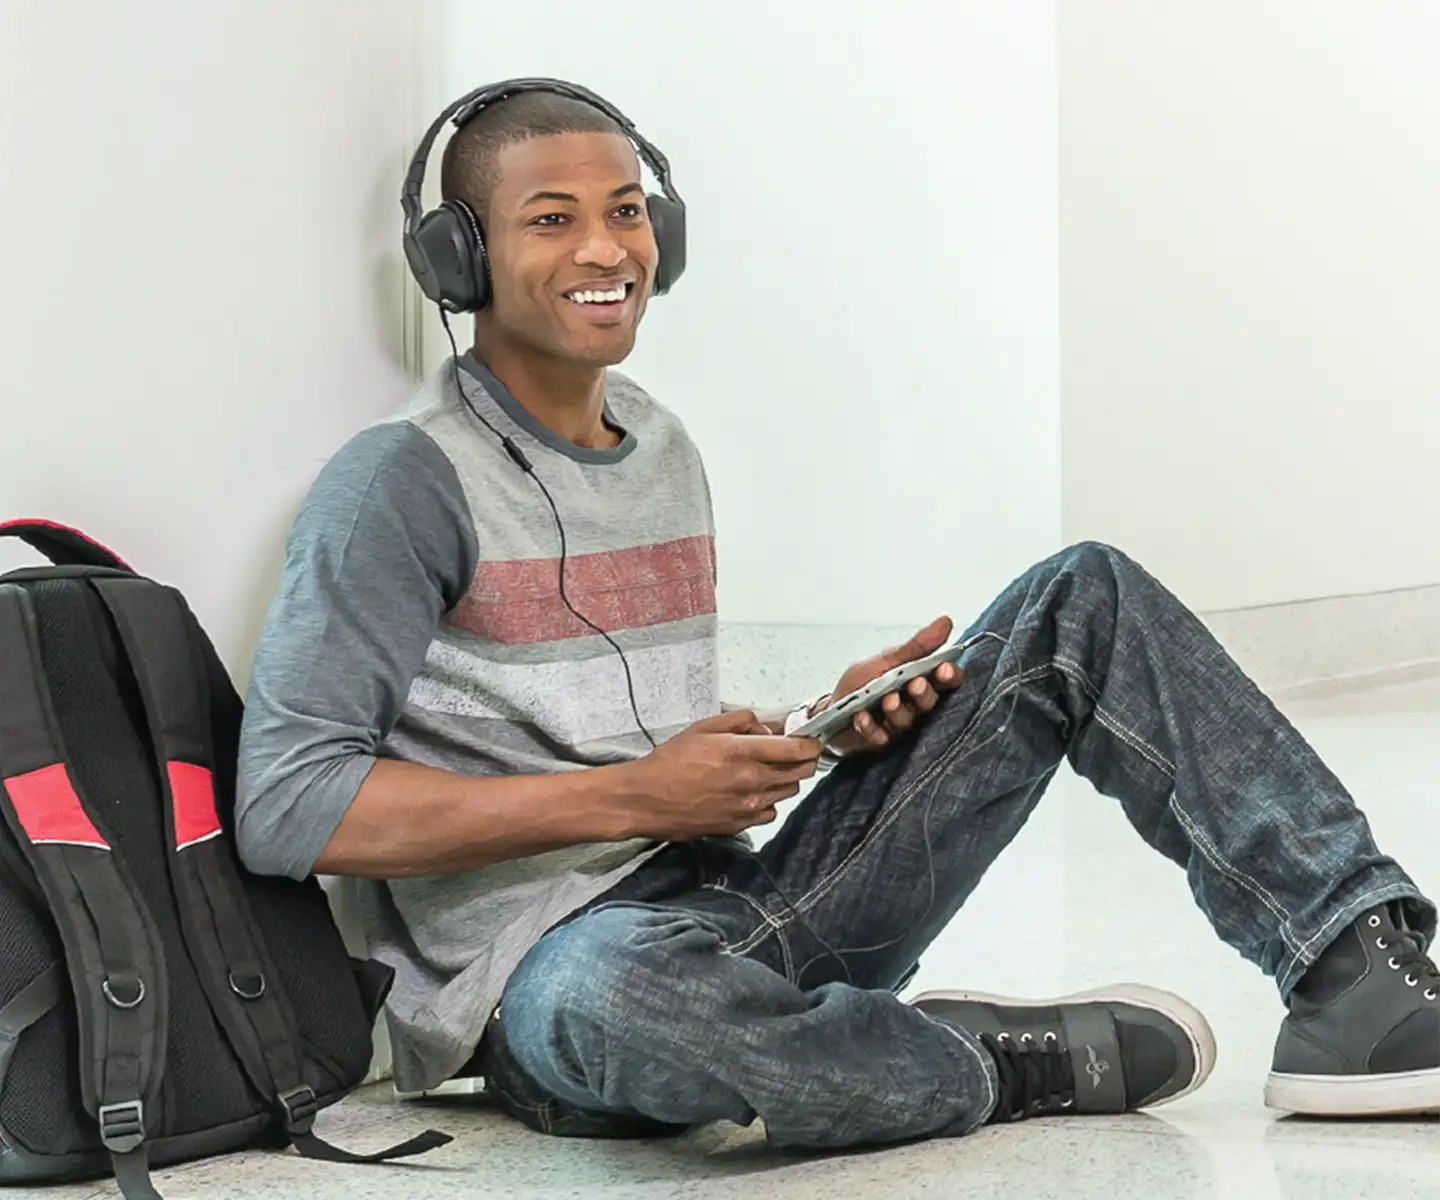 young man seated on floor listening to headphones